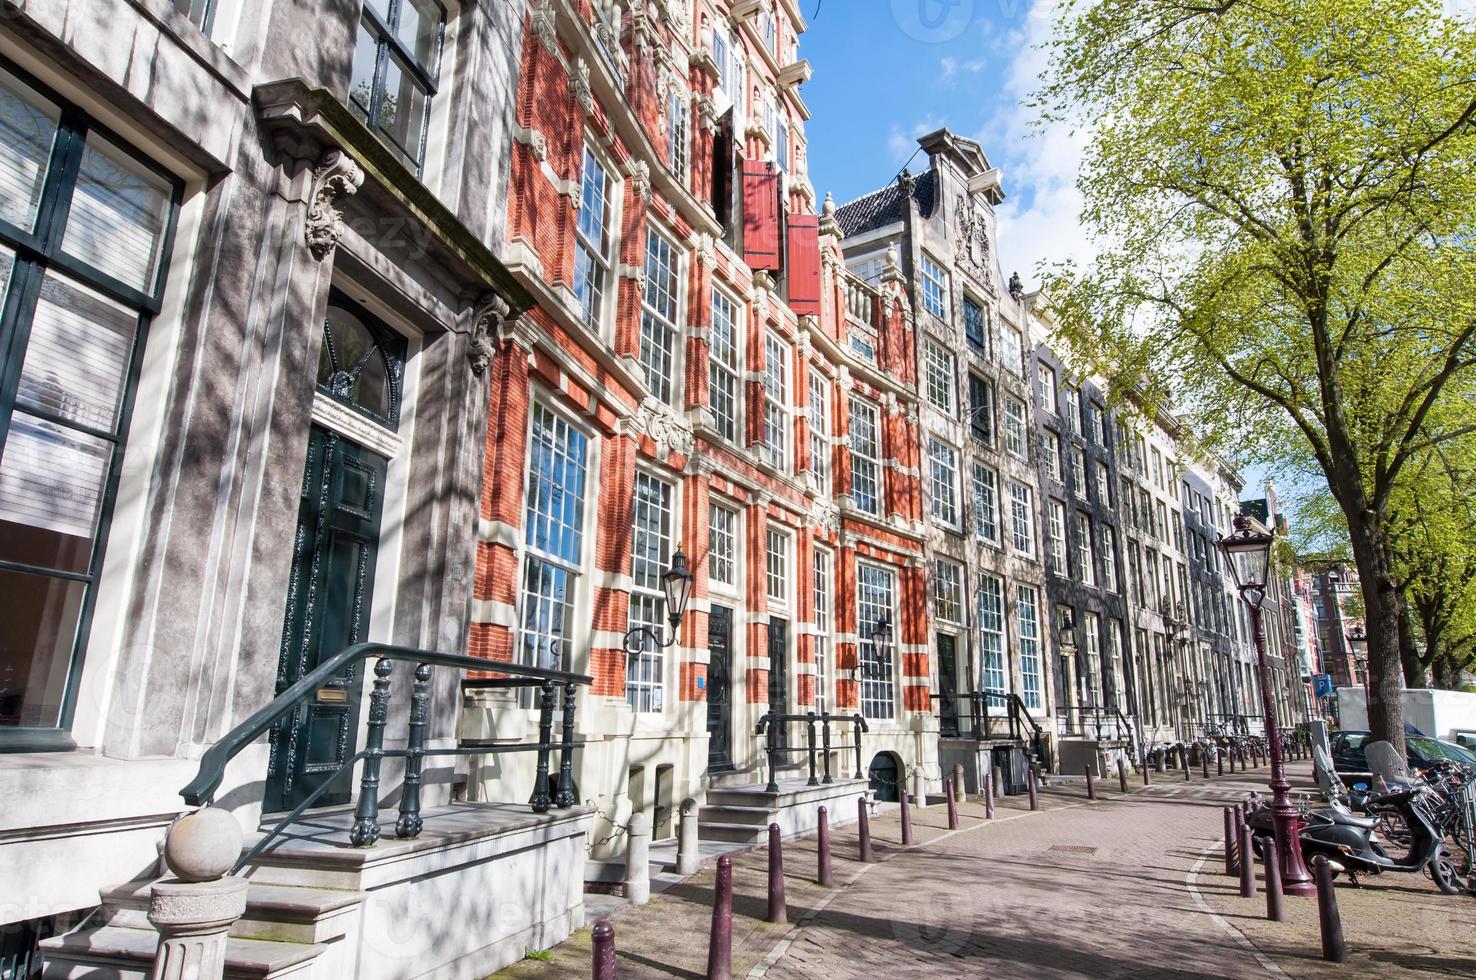 Amsterdam17th century residence buildings, the Netherlands. photo